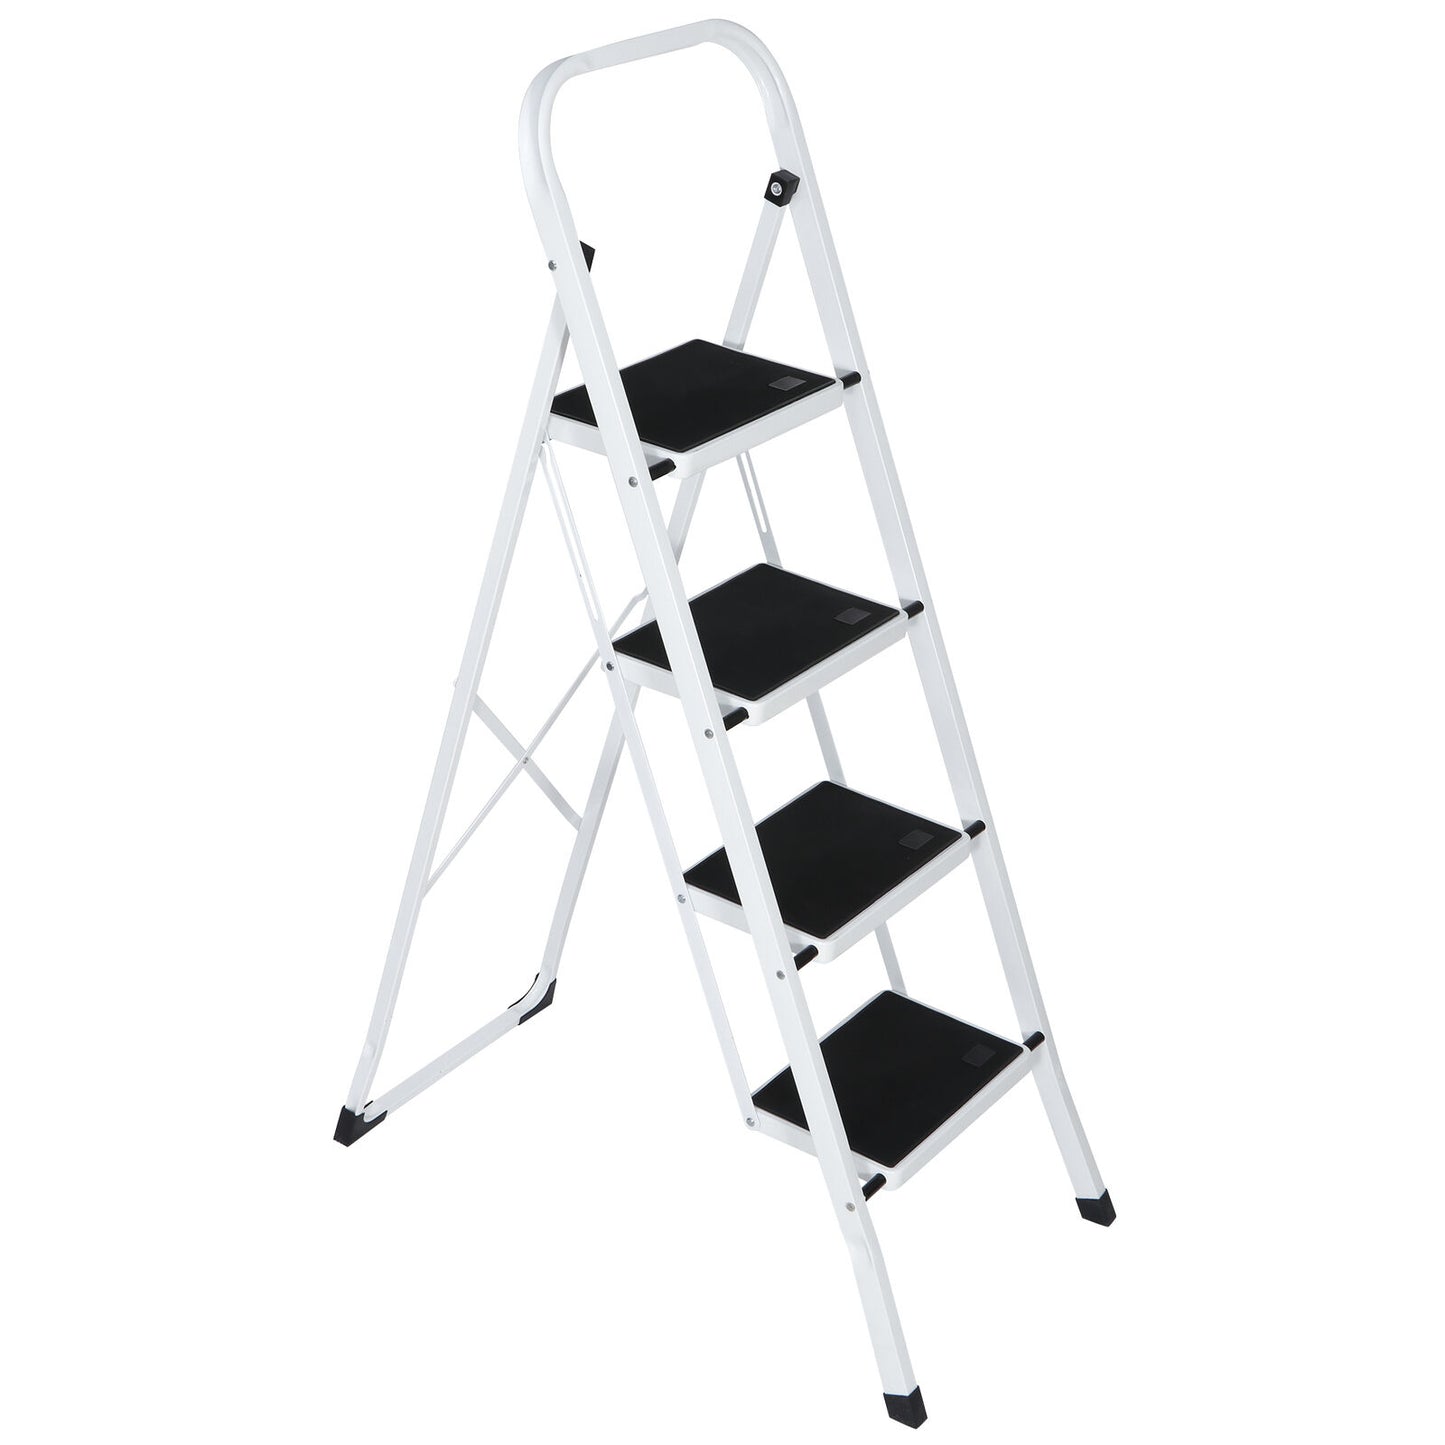 4 Steps Ladder Folding Anti-Slip Safety Tread Industrial Home Use 300Lbs Load